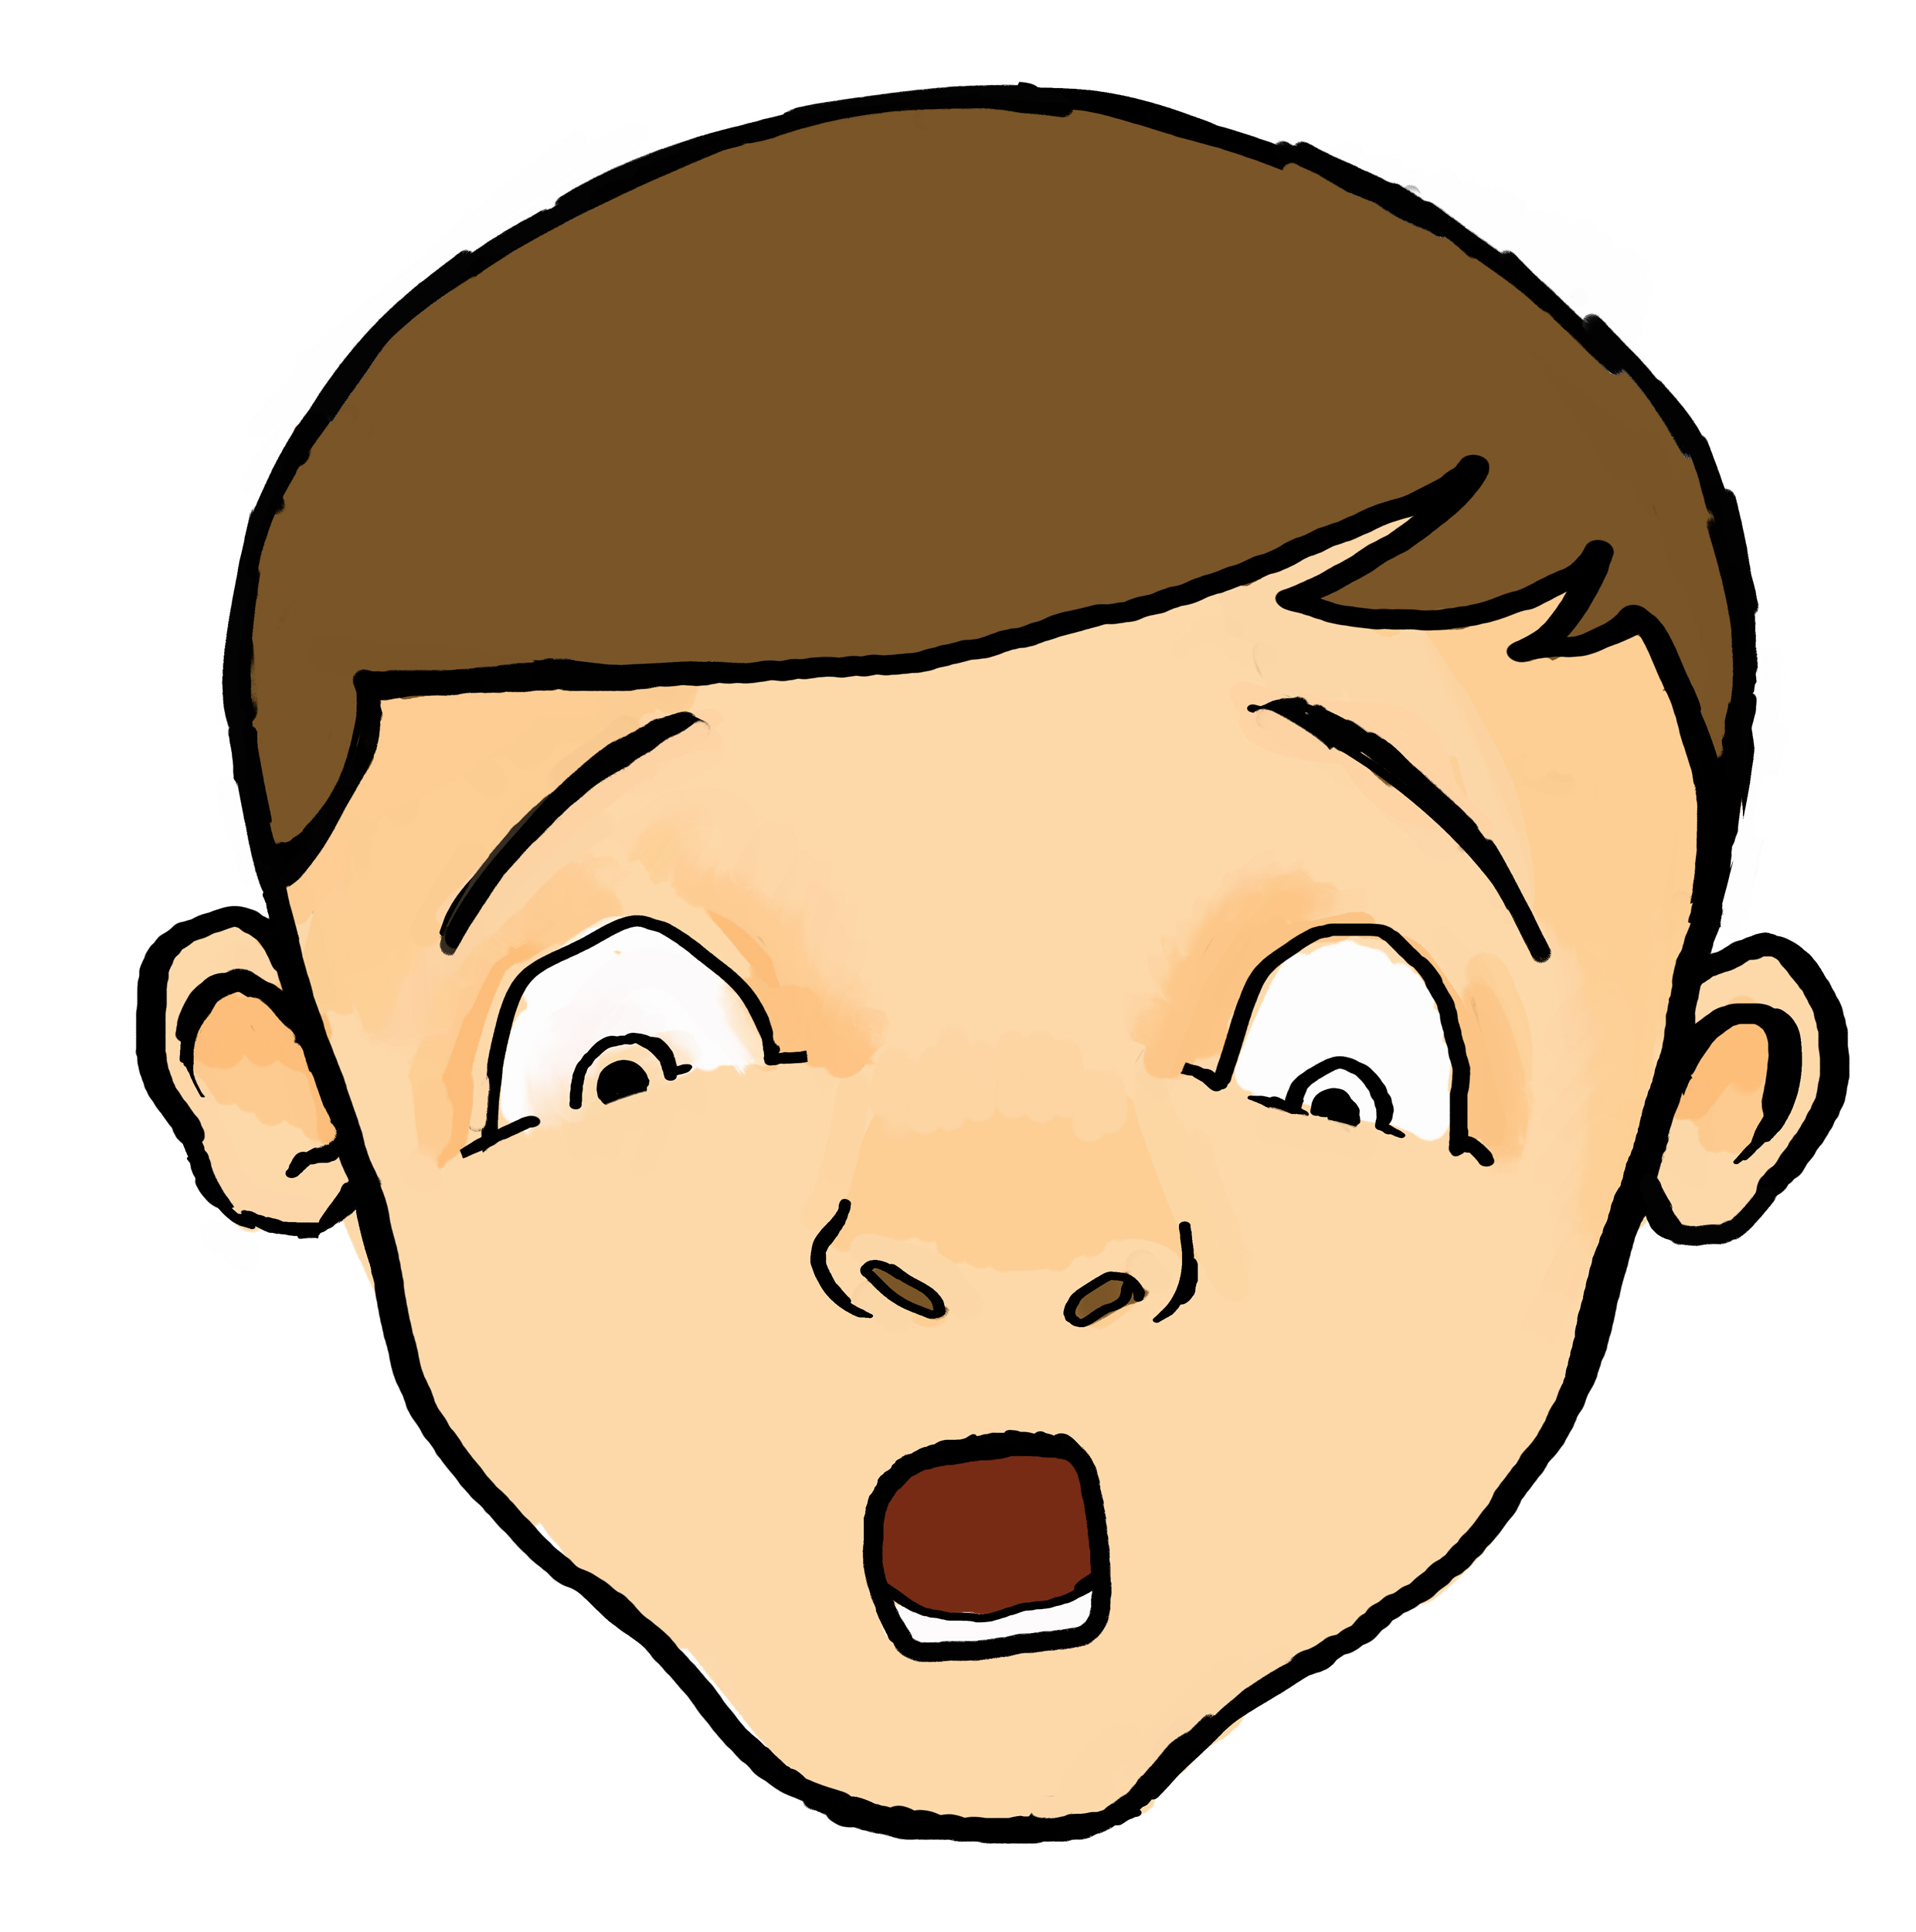 shocked person clip art